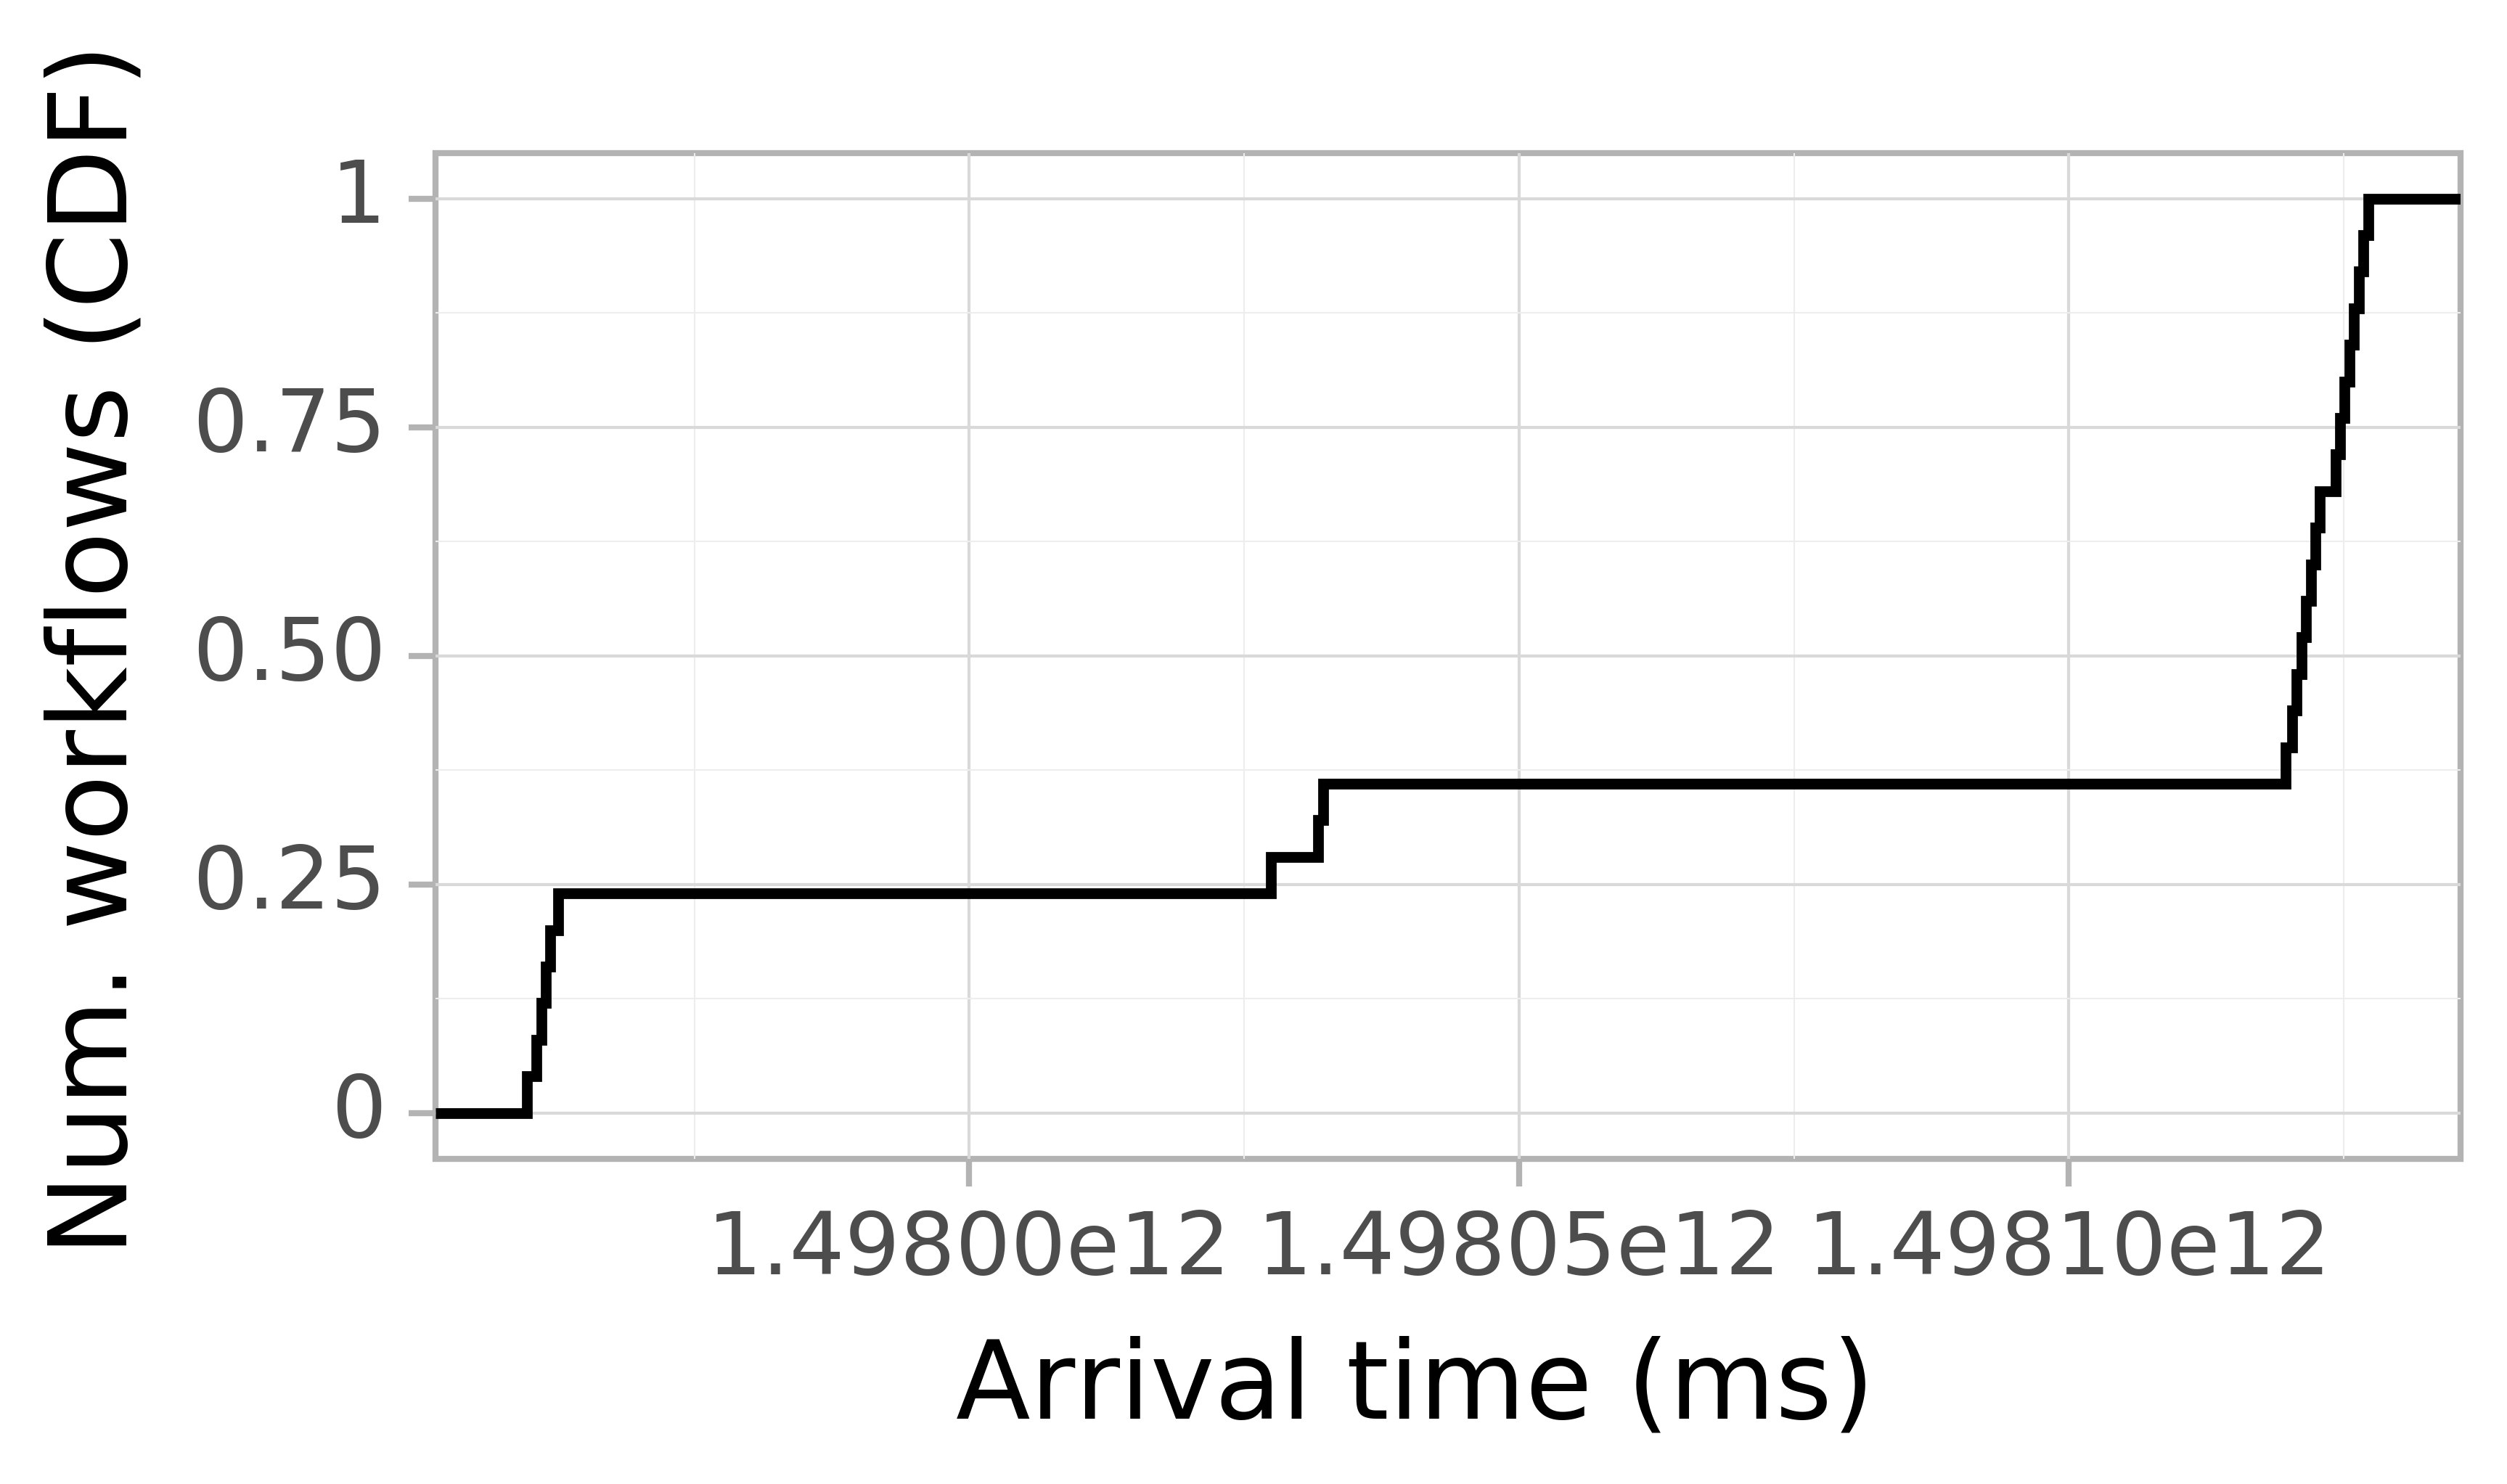 Job arrival CDF graph for the askalon-new_ee27 trace.